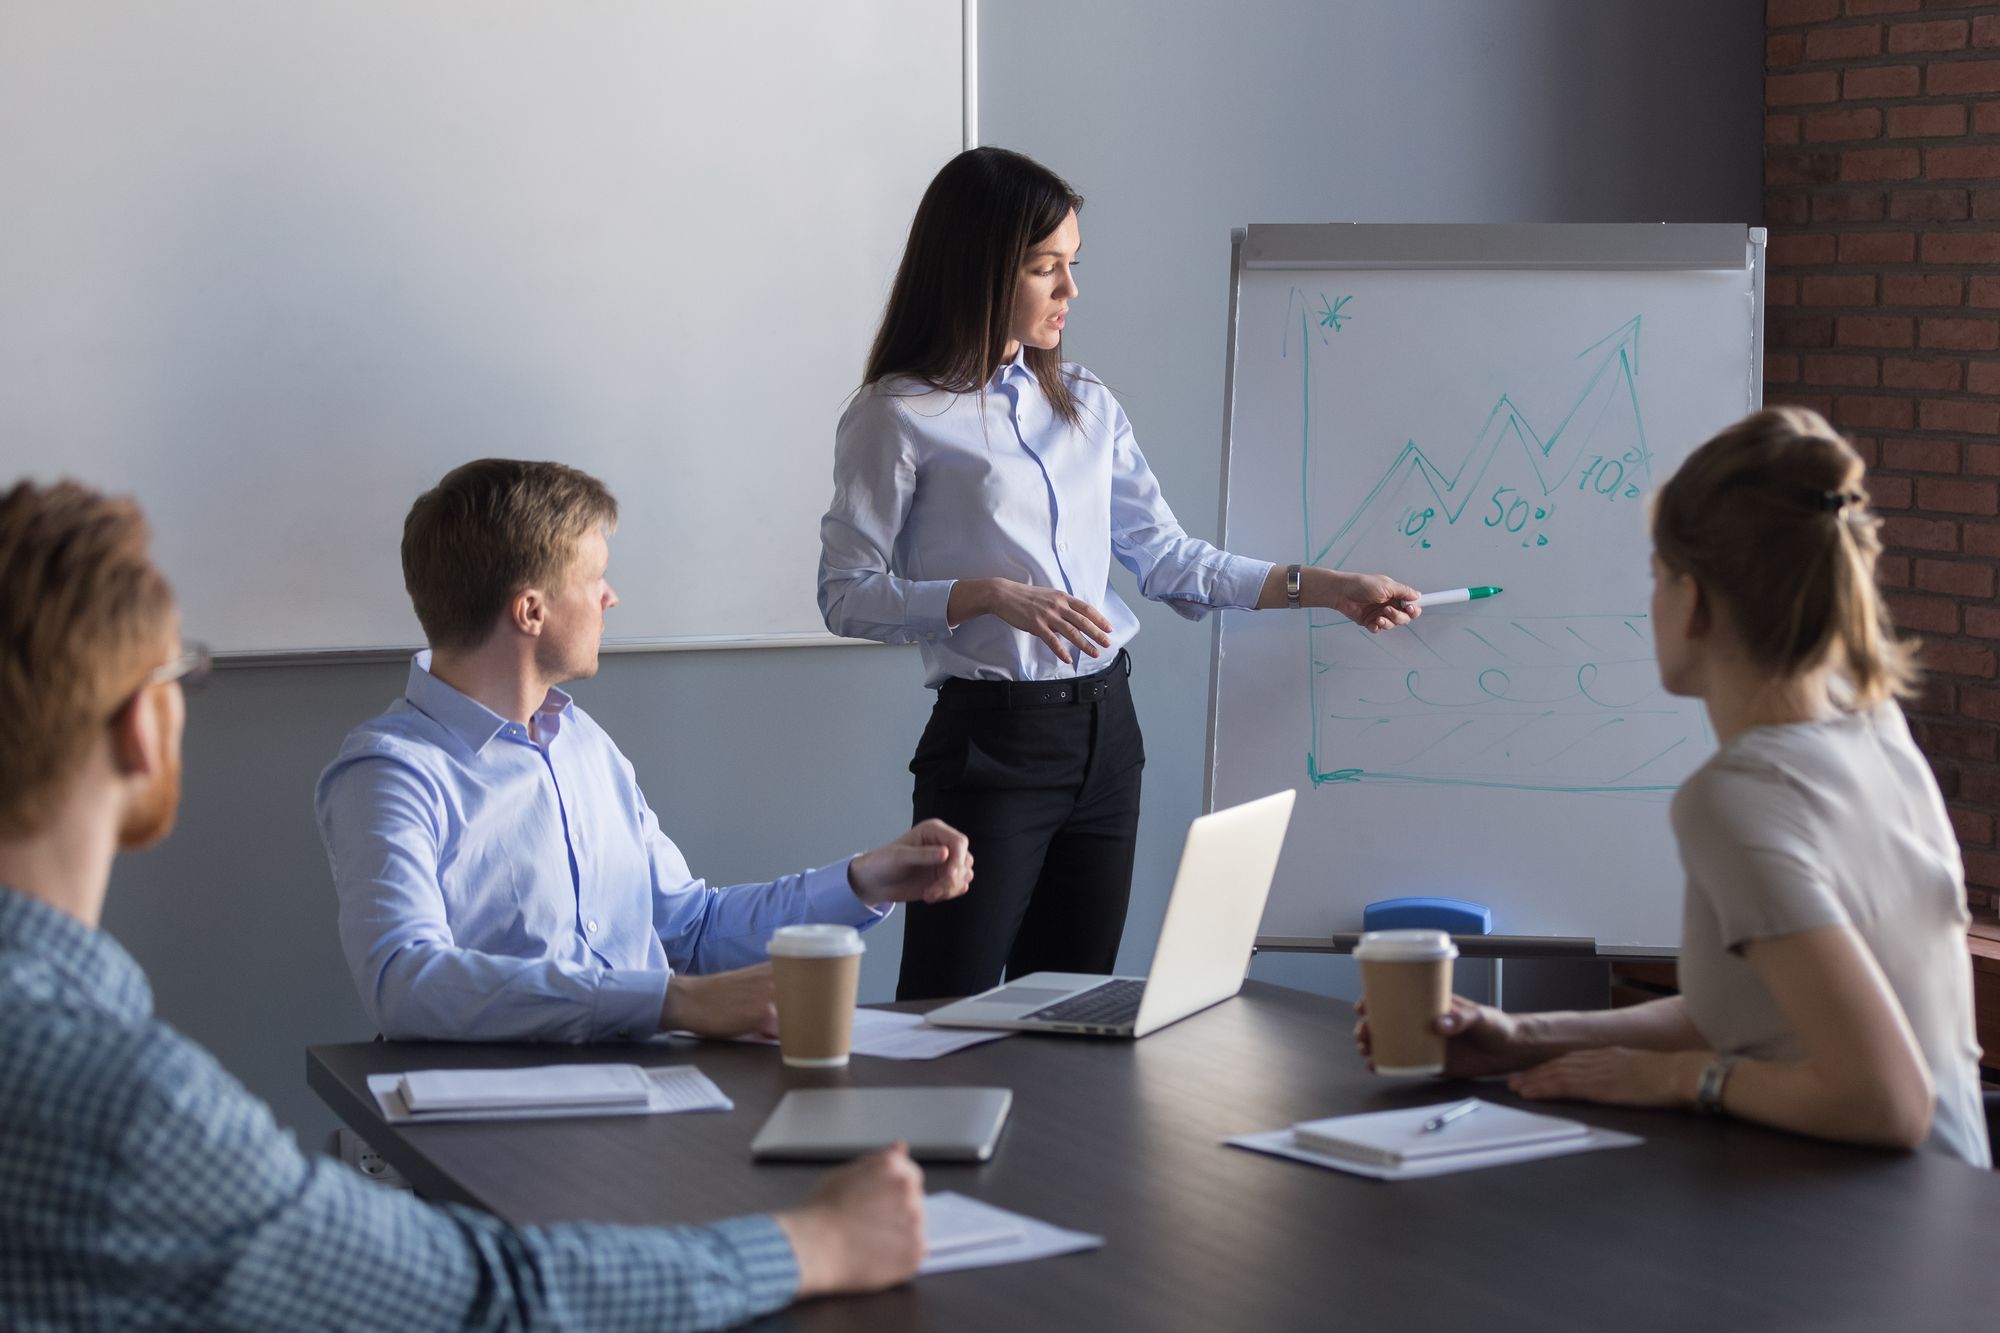 A real estate team leader leads a meeting with three other agents, pointing to a graph on a white board that show a projected growth of clients.